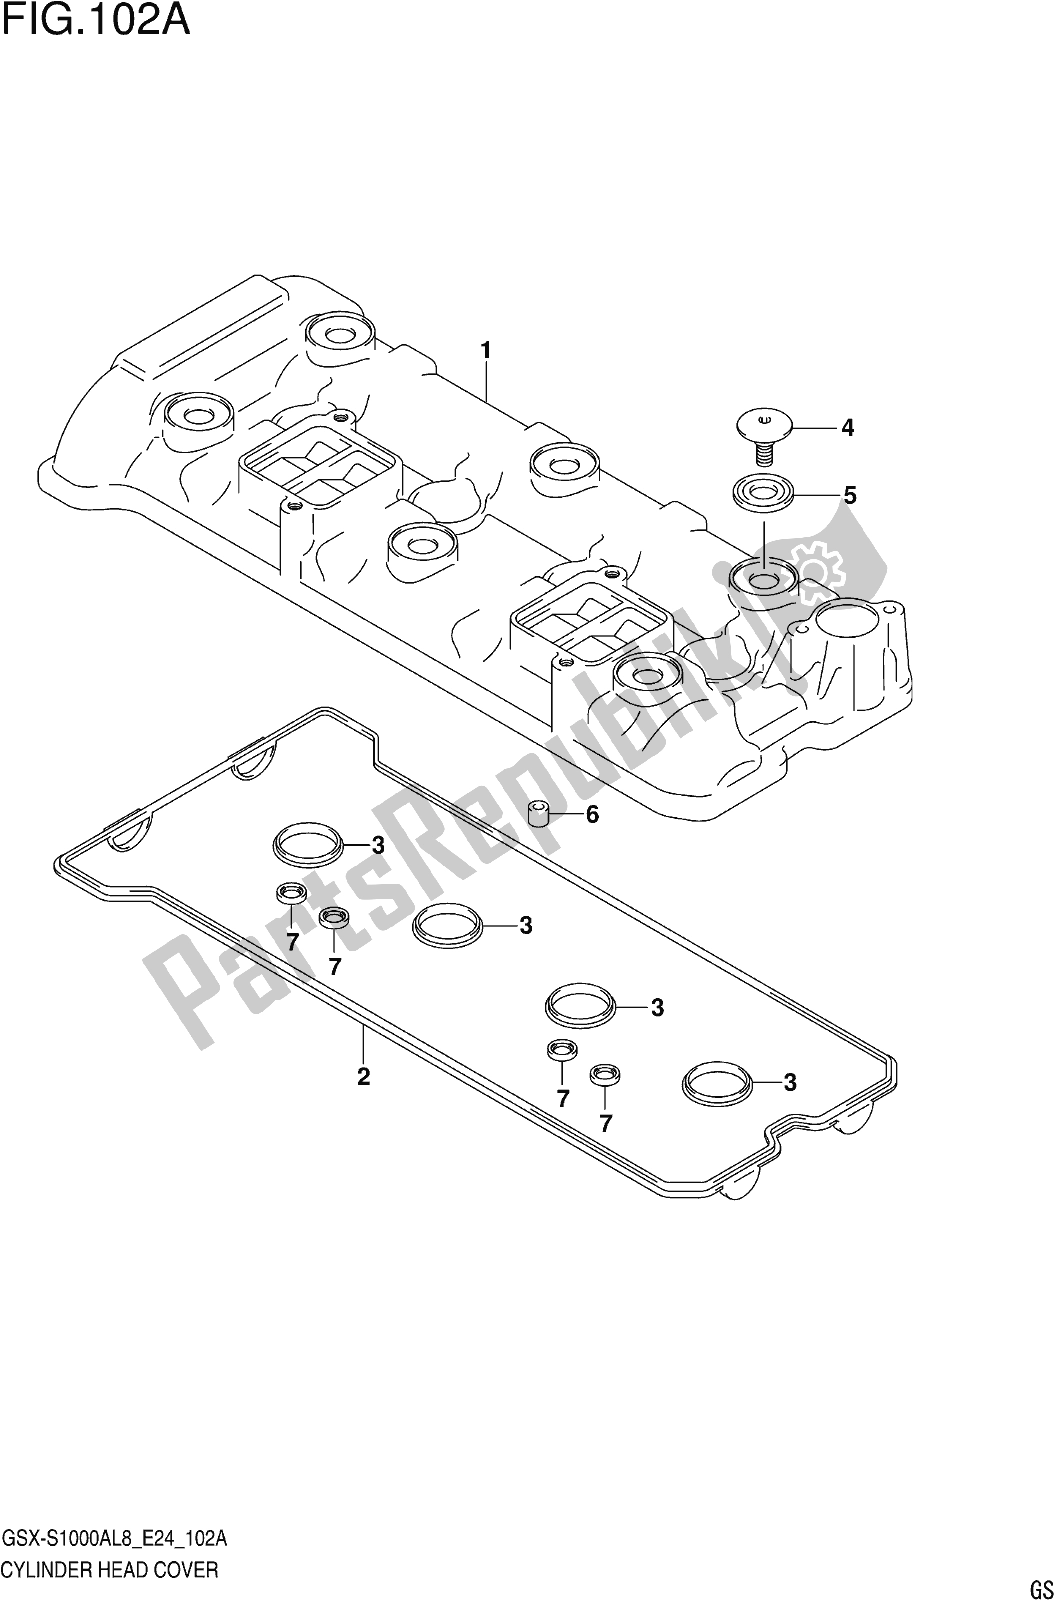 All parts for the Fig. 102a Cylinder Head Cover of the Suzuki Gsx-s 1000 AZ 2018